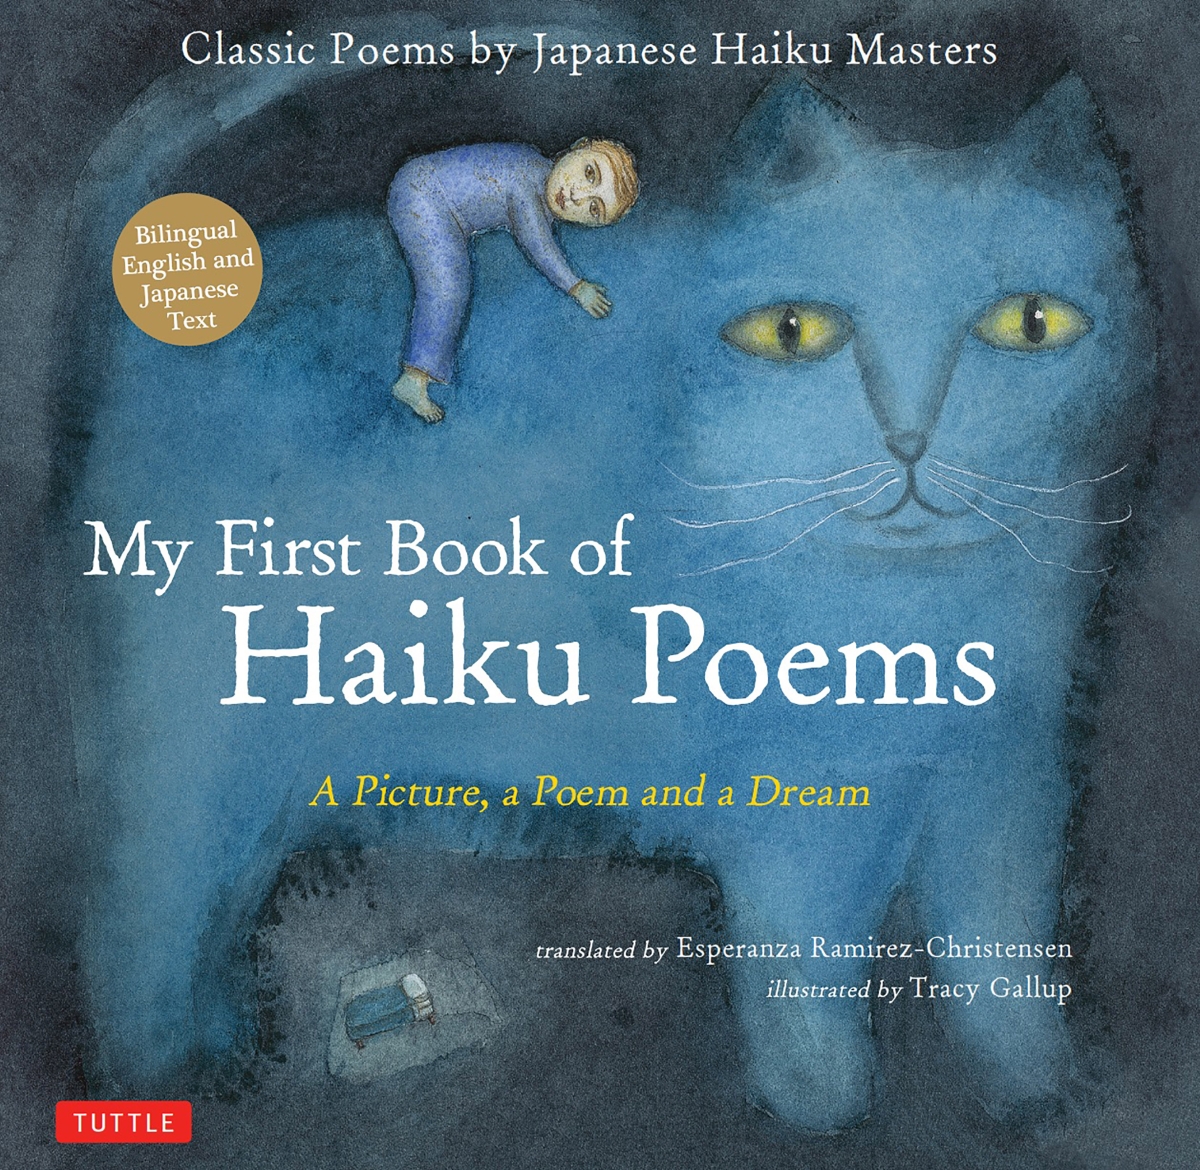 StoryTime with Tracy Gallup- My First Book of Haiku Poems